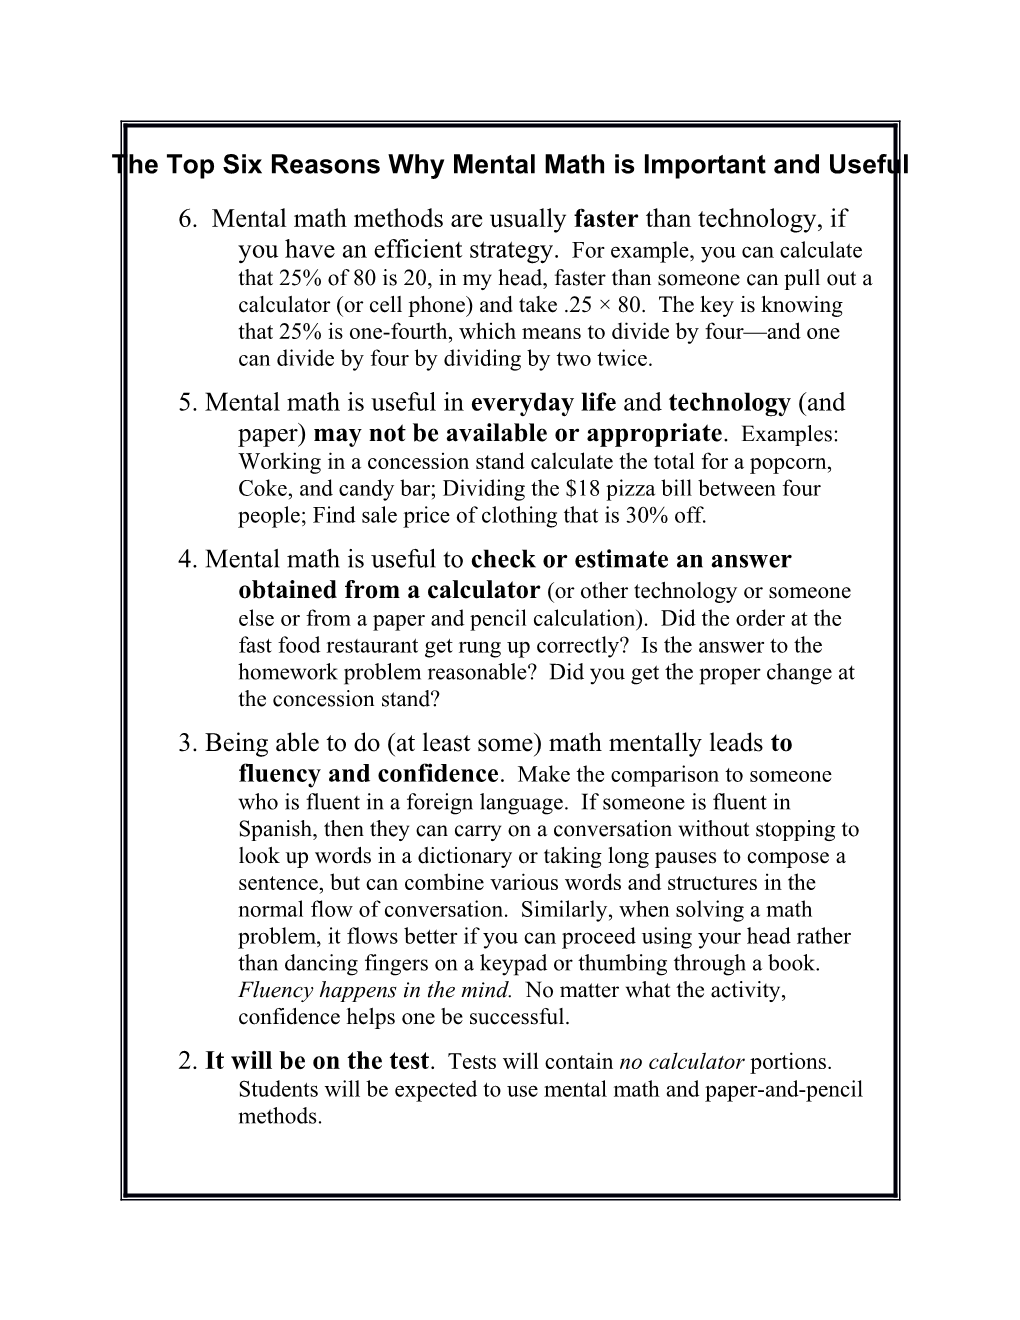 The Top Six Reasons Why Mental Math Is Important and Useful